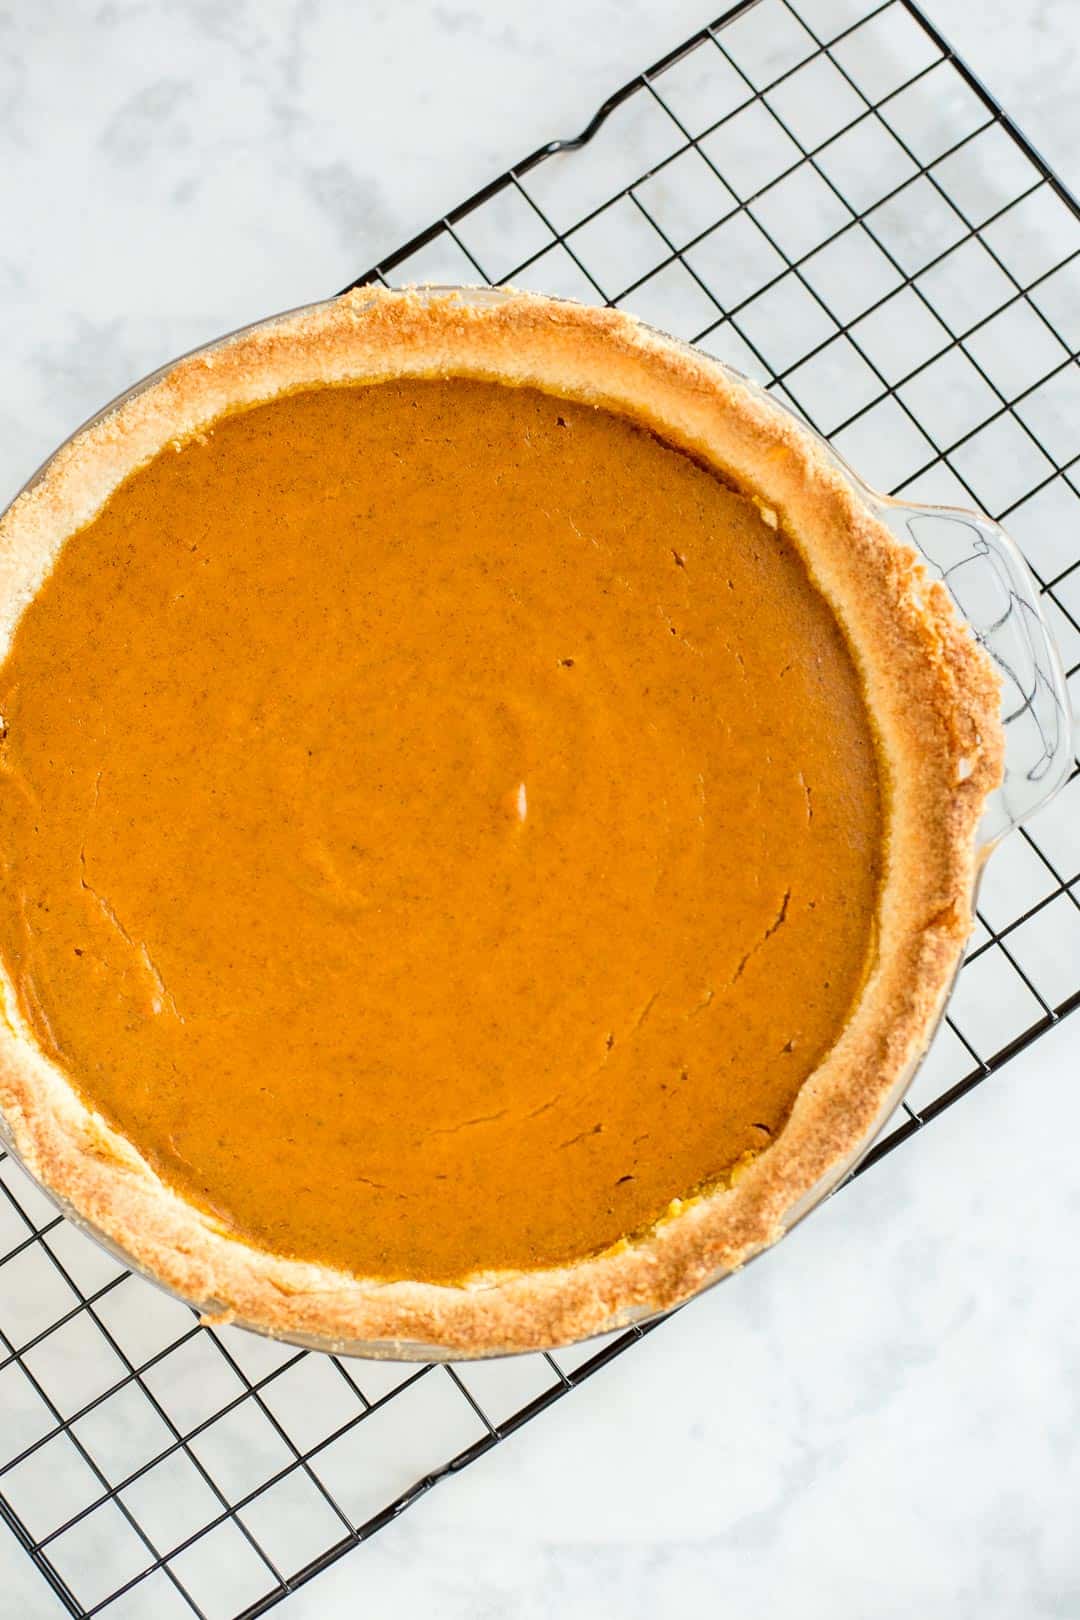 Just baked Keto Pumpkin Pie on a wire rack